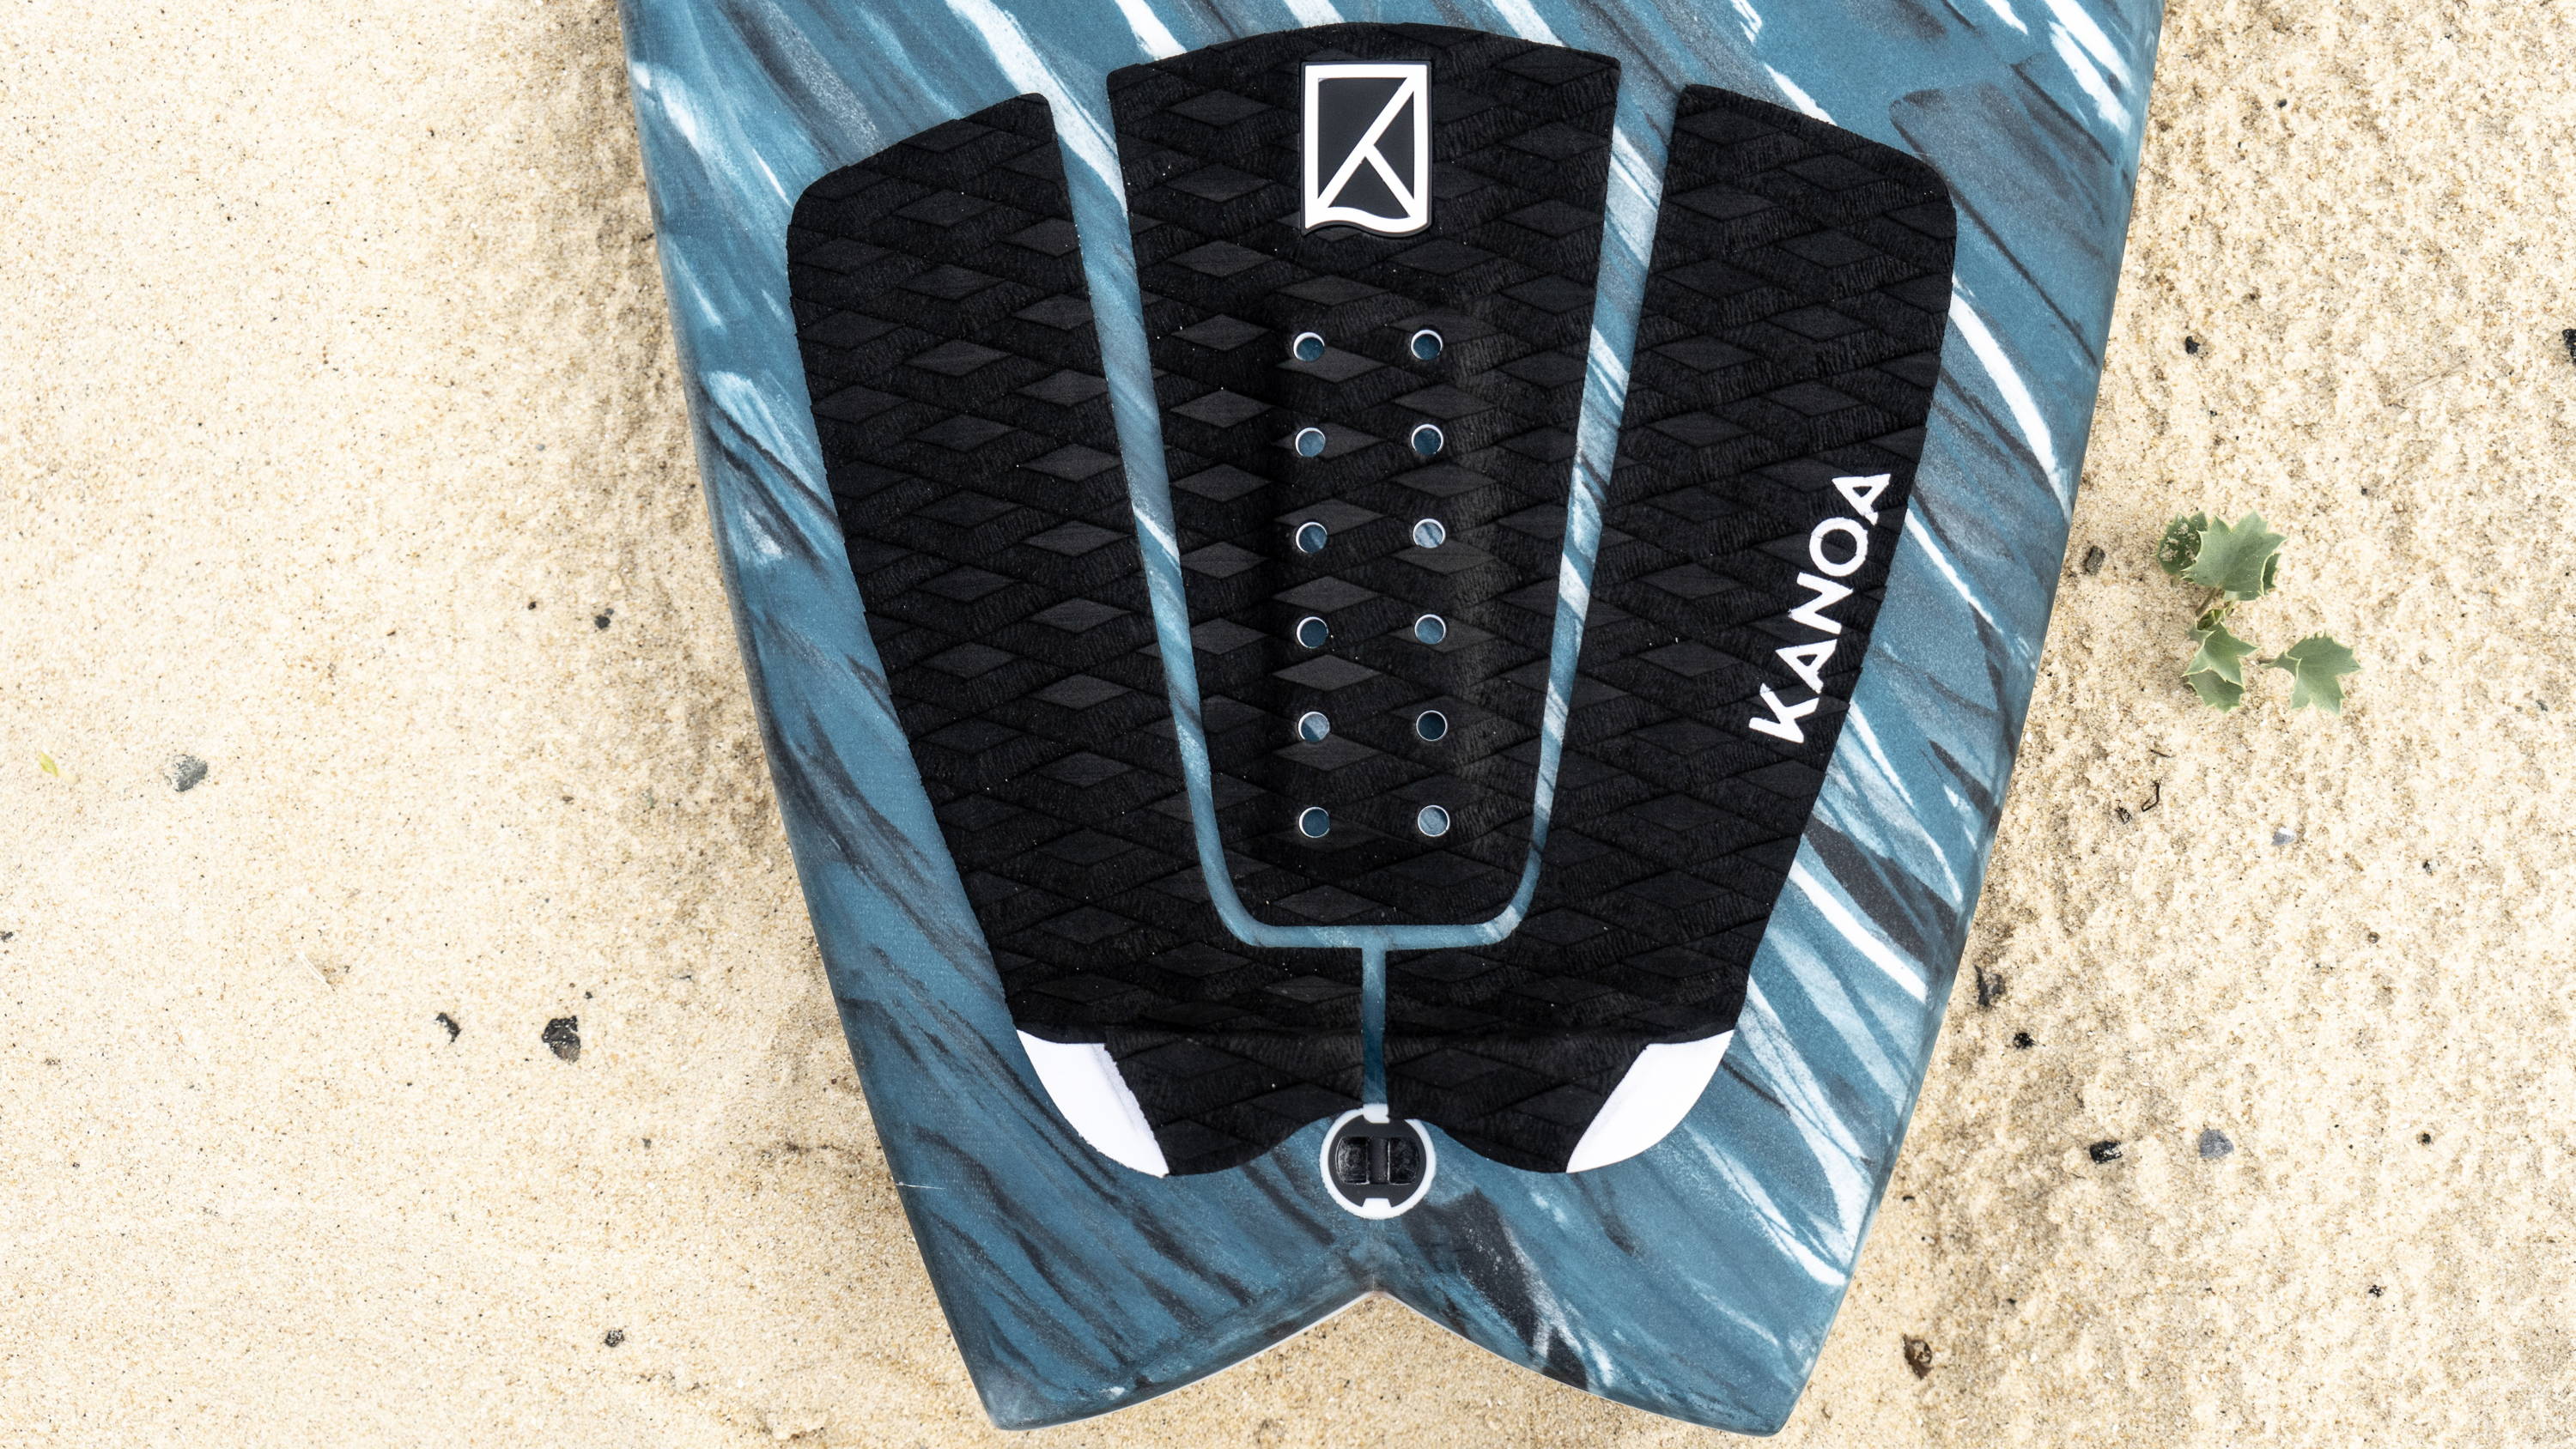 HOW TO: Install a surfboard tailpad